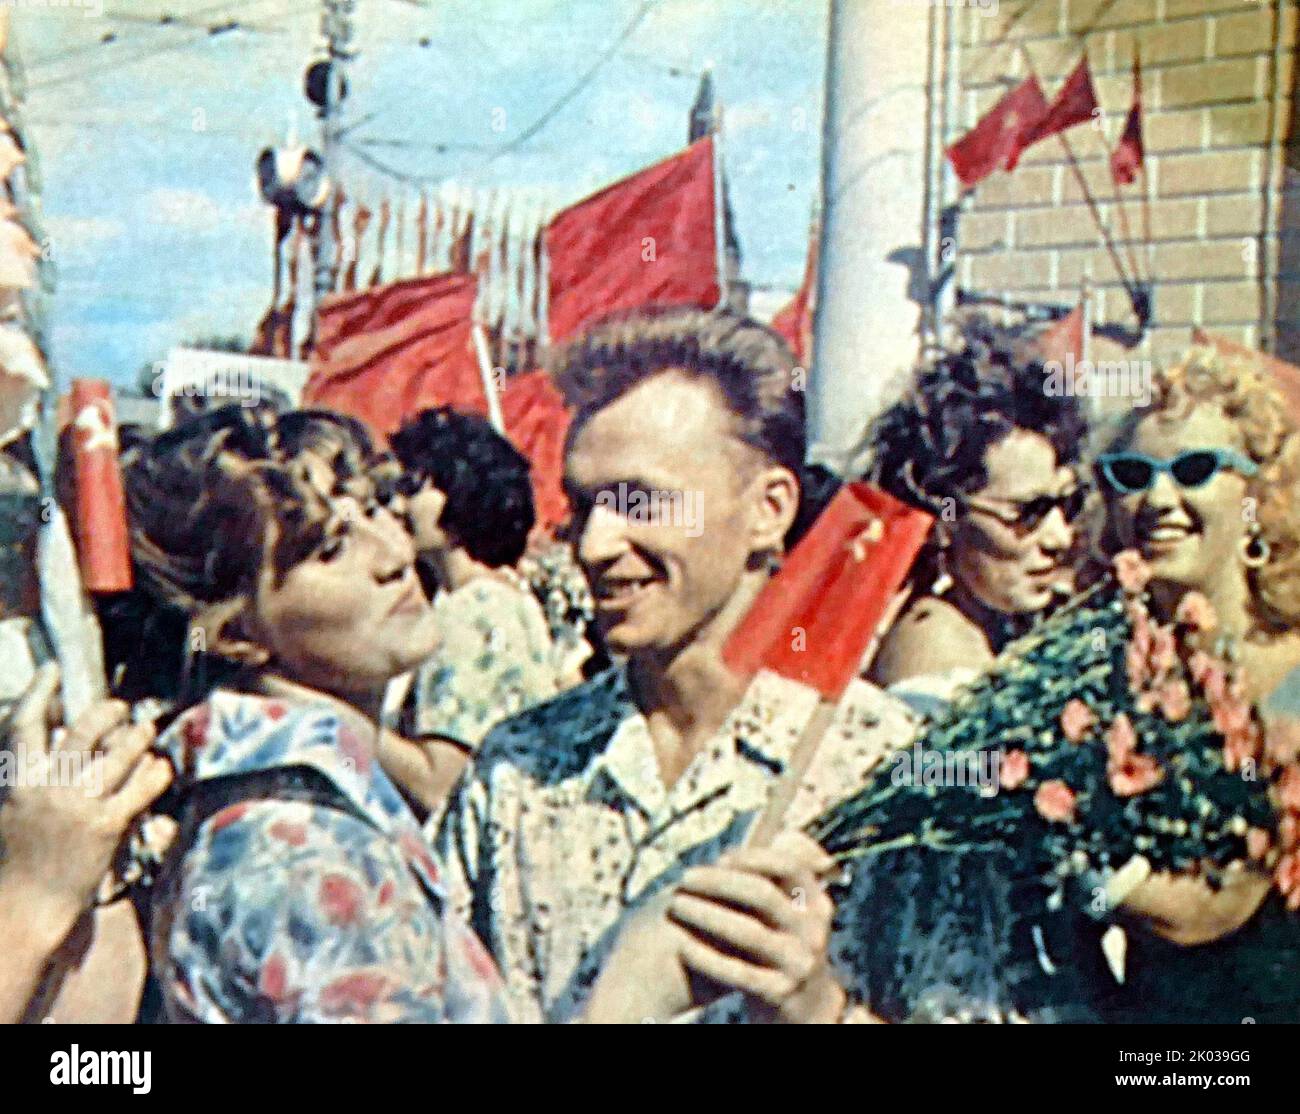 A crowd in Moscow celebrates the safe return of Soviet cosmonaut Yuri Alekseevich Gagarin (1934-1968). On April 12, 1961, Yuri Gagarin became the first person in world history to fly into open space. The Vostok launch vehicle with the Vostok-1 spacecraft carrying Gagarin was launched from the Baikonur cosmodrome located in the Kyzyl-Orda region of Kazakhstan. Stock Photo